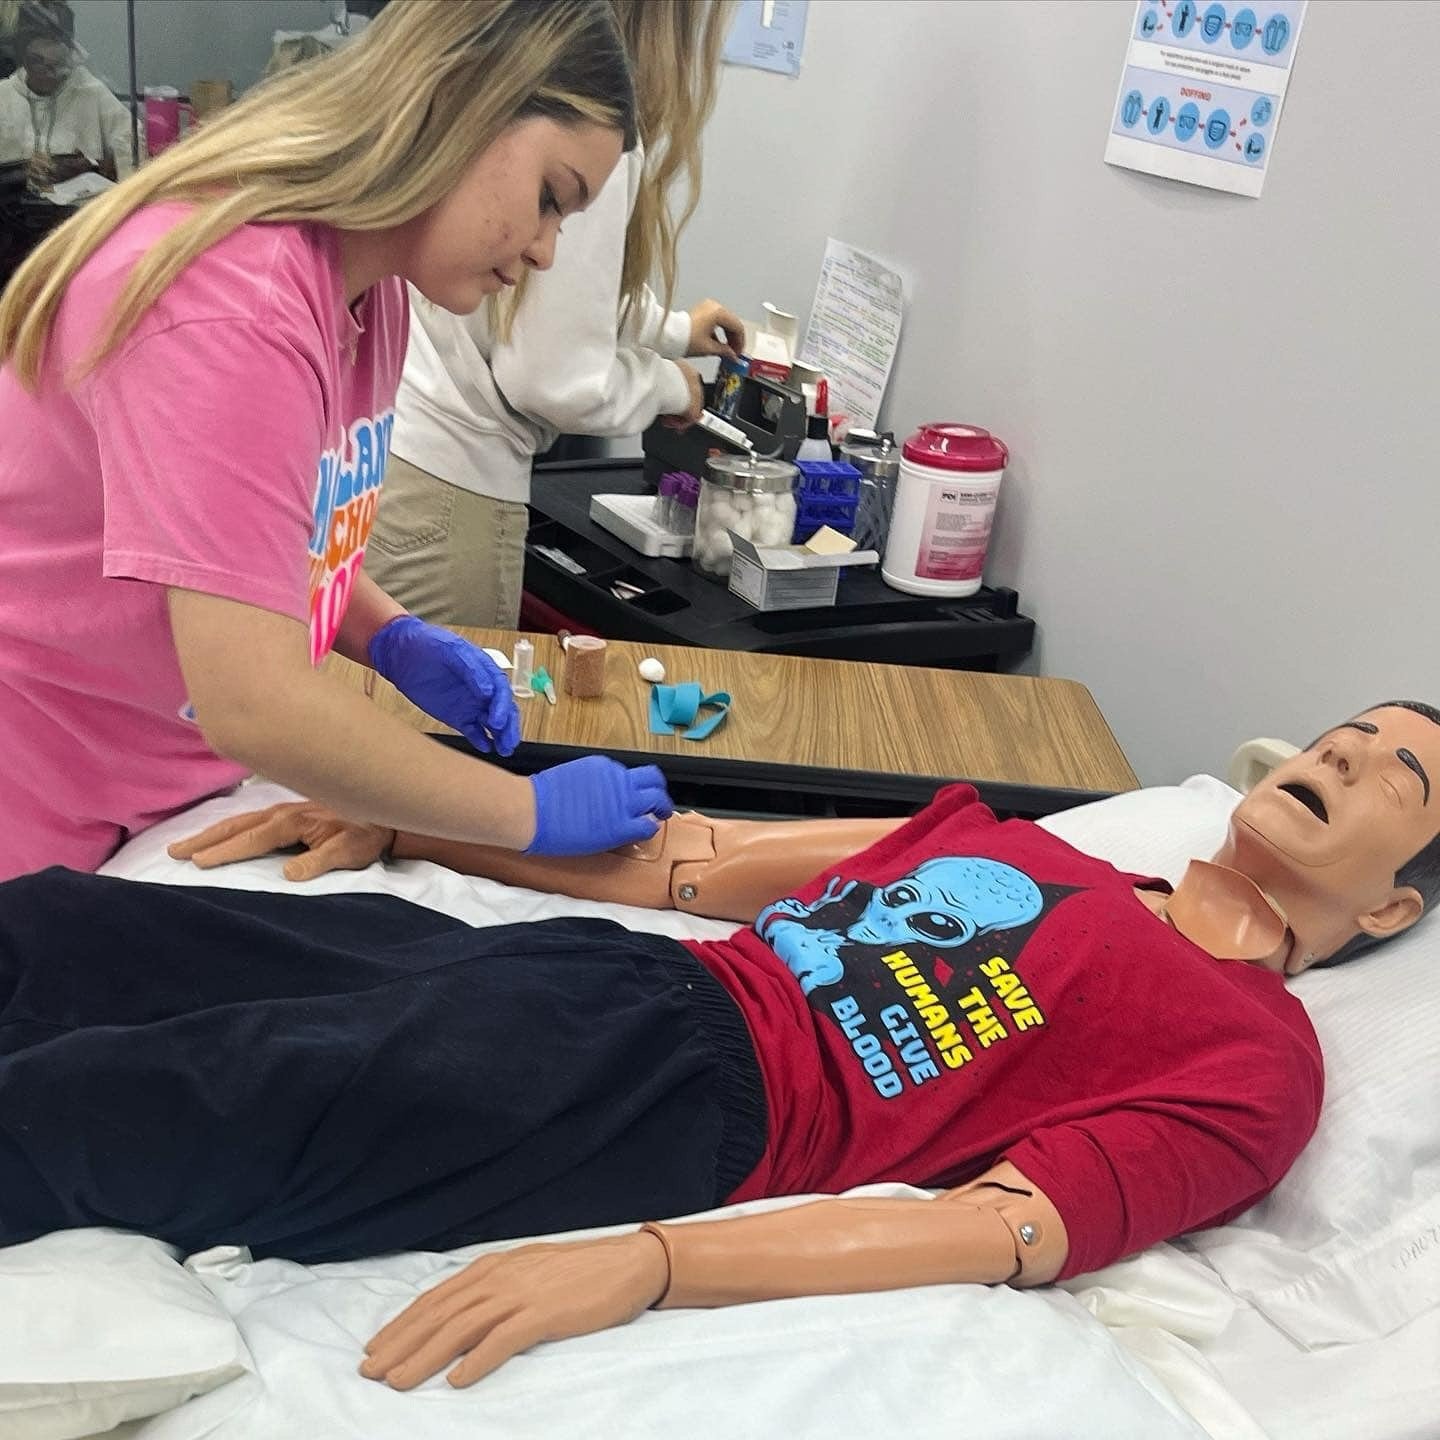 Nevaeh Sanchez, a senior from Mooreland who majored in Phlebotomy, completed her clinical rotation at Dr. Kirkendals. Recently, Nevaeh was honored with the Clinical Excellence award for the morning Health Careers class, based on the positive feedback